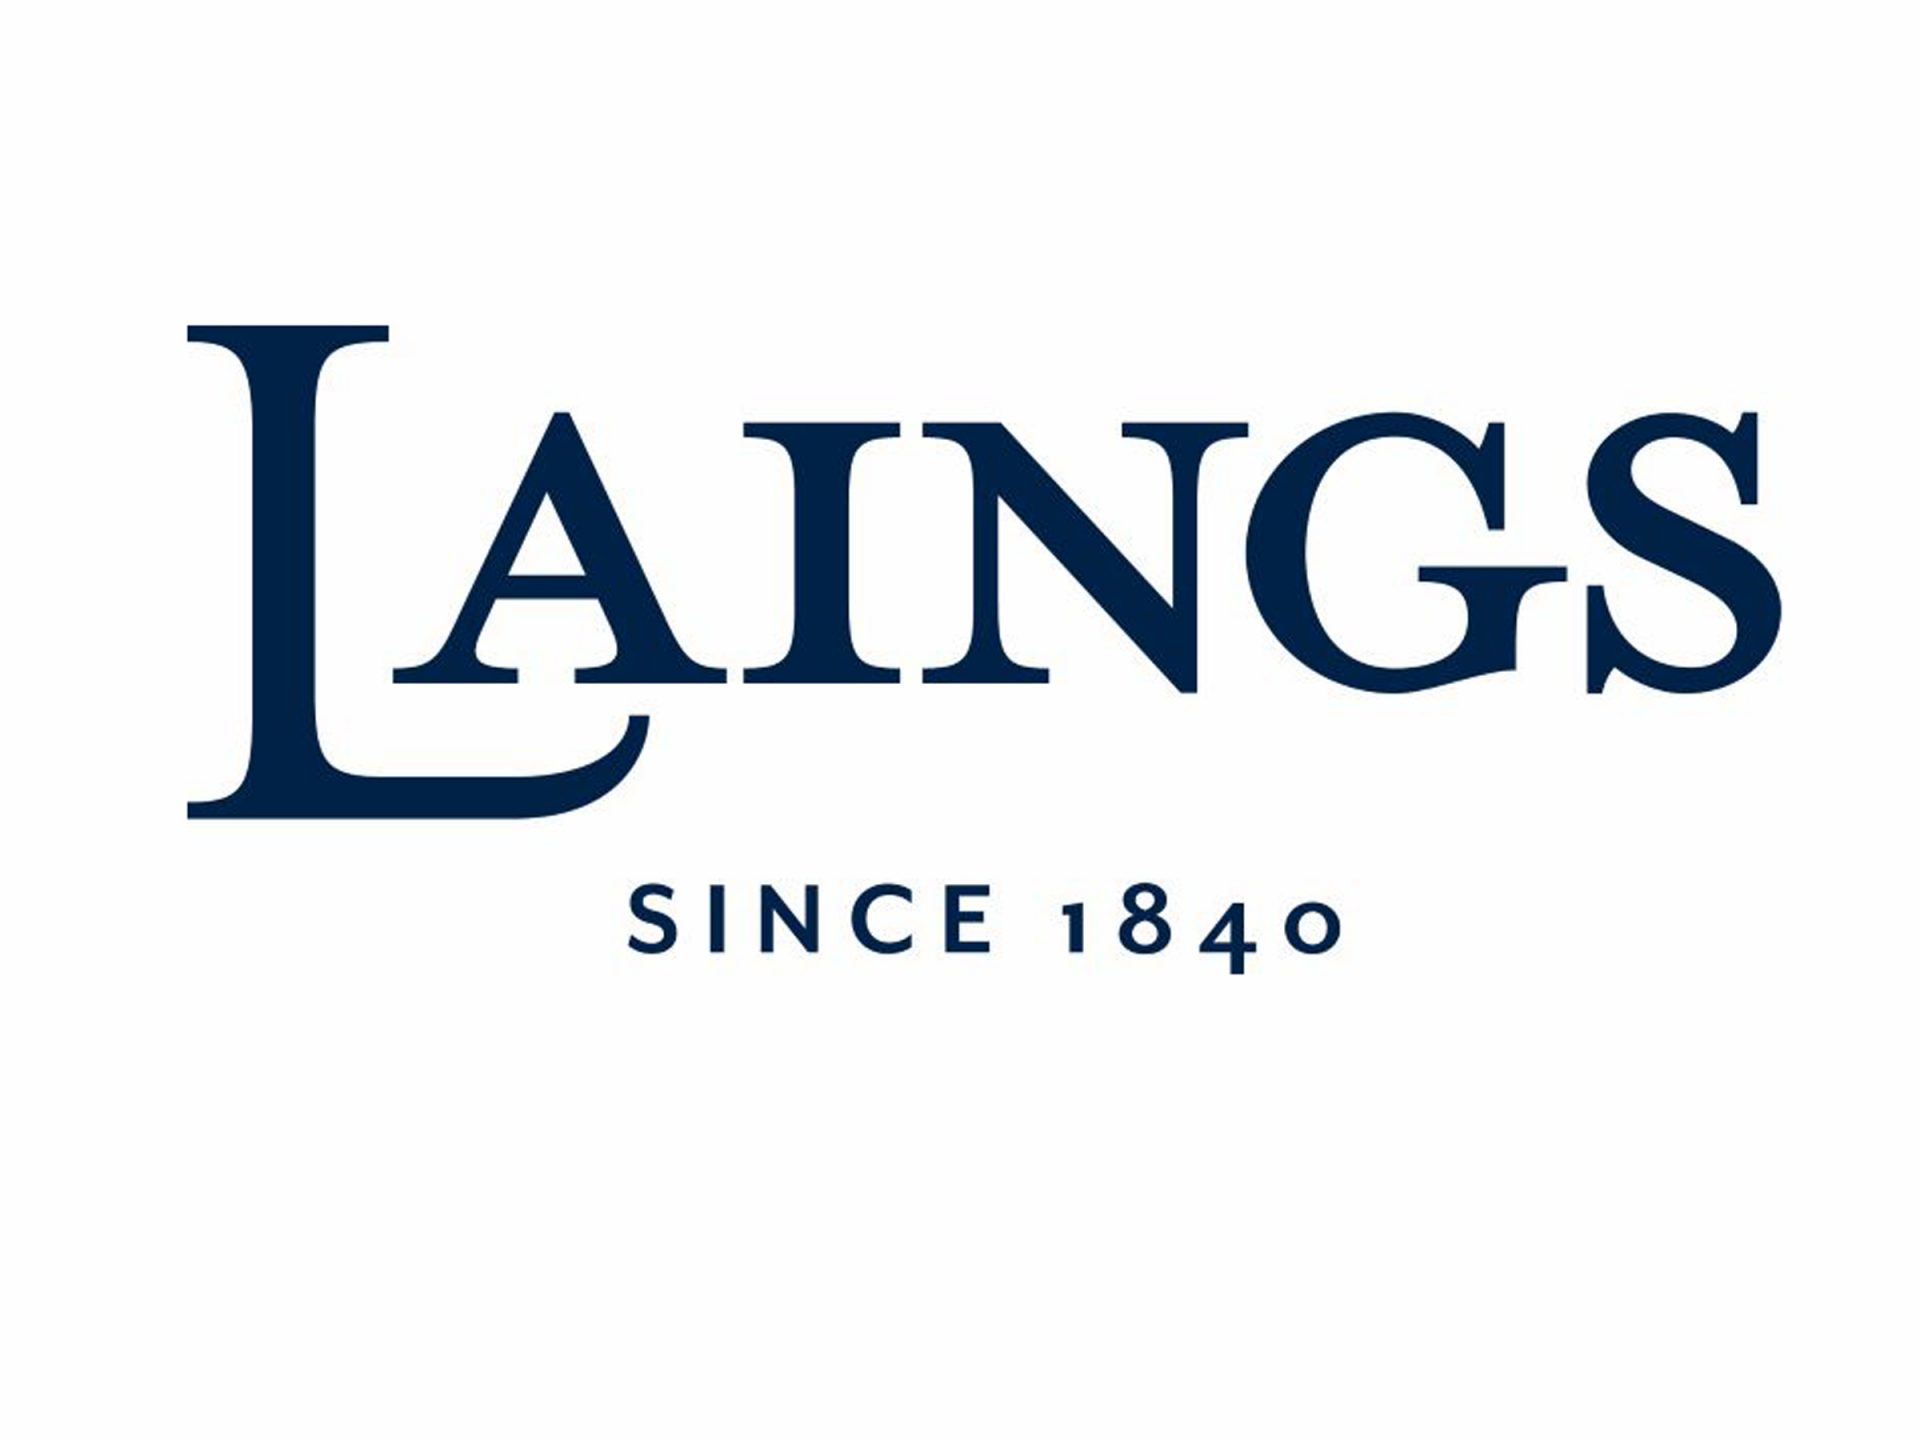 Laing's luxury jewellers enjoy sparkling results with 5% rise in turnover